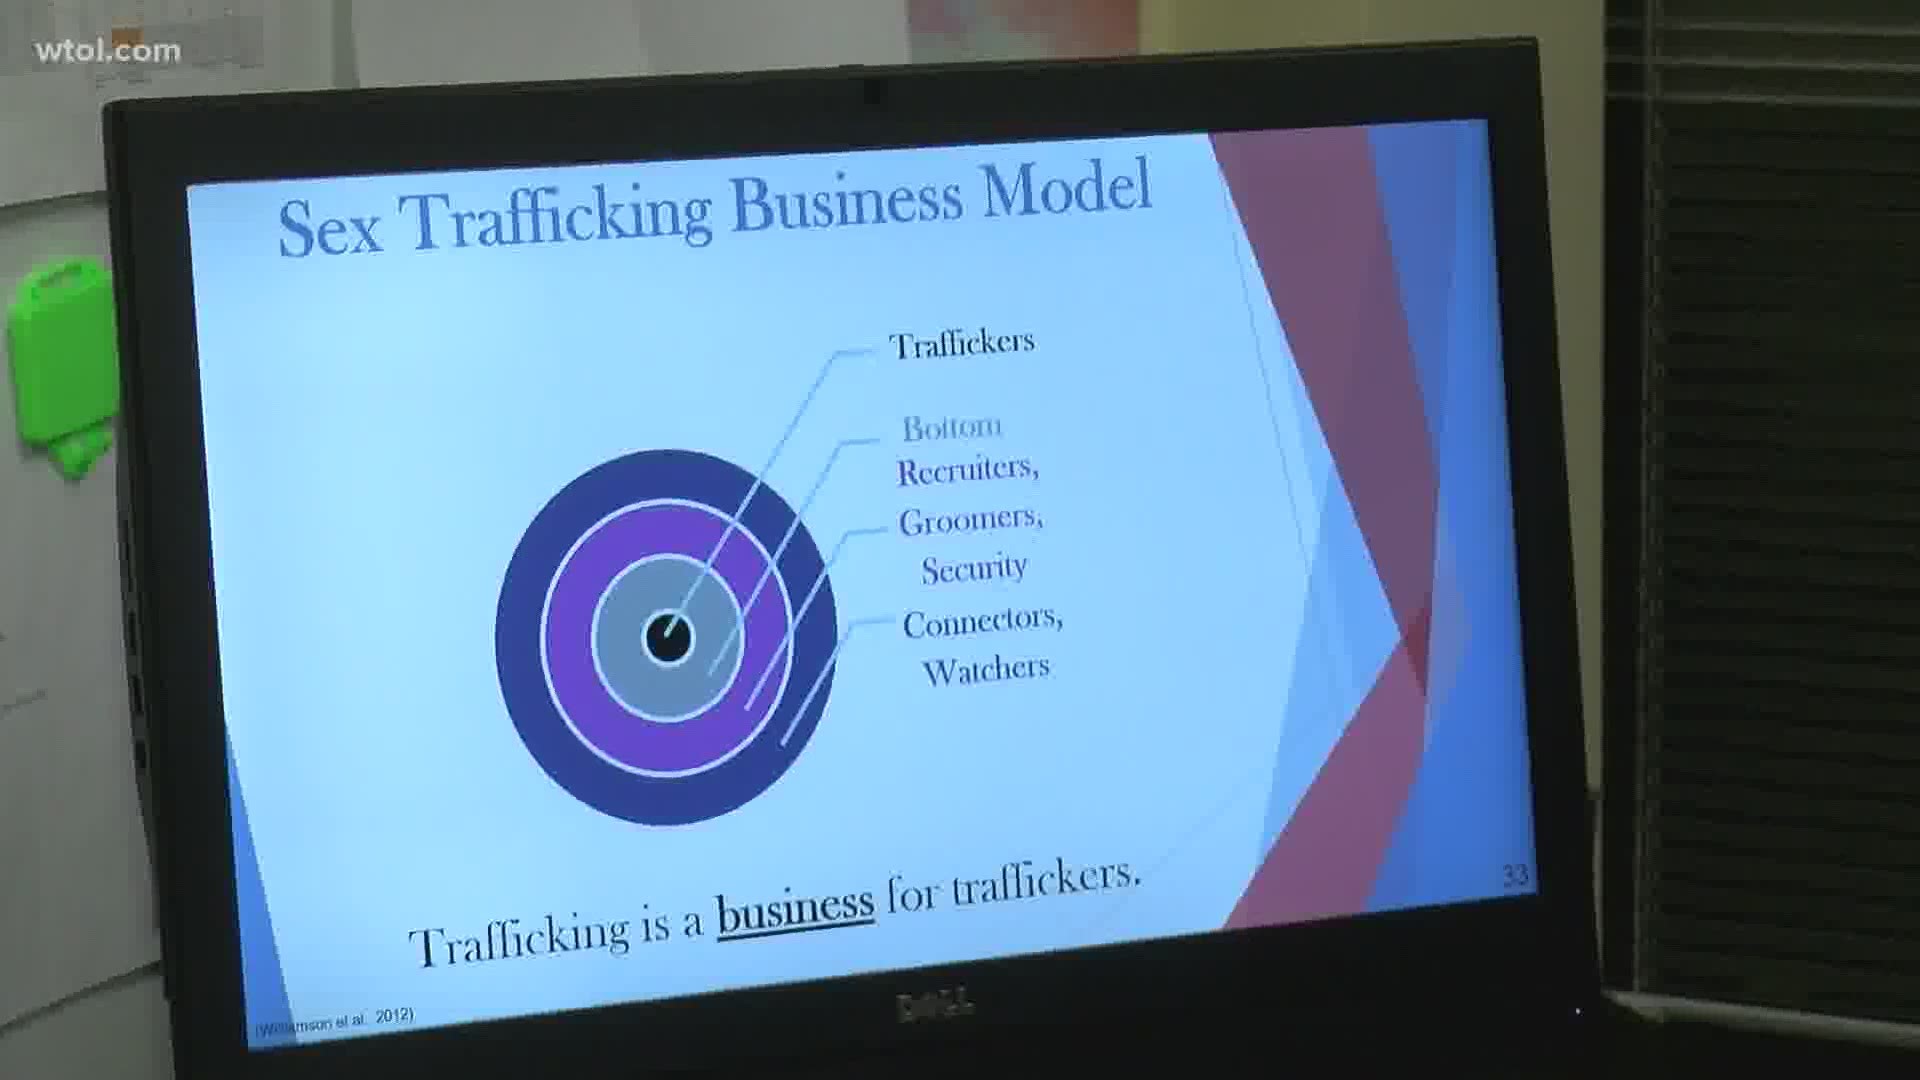 Leading groups like the University of Toledo's Human Trafficking and Social Justice Institute are adapting to continue helping victims of human trafficking.